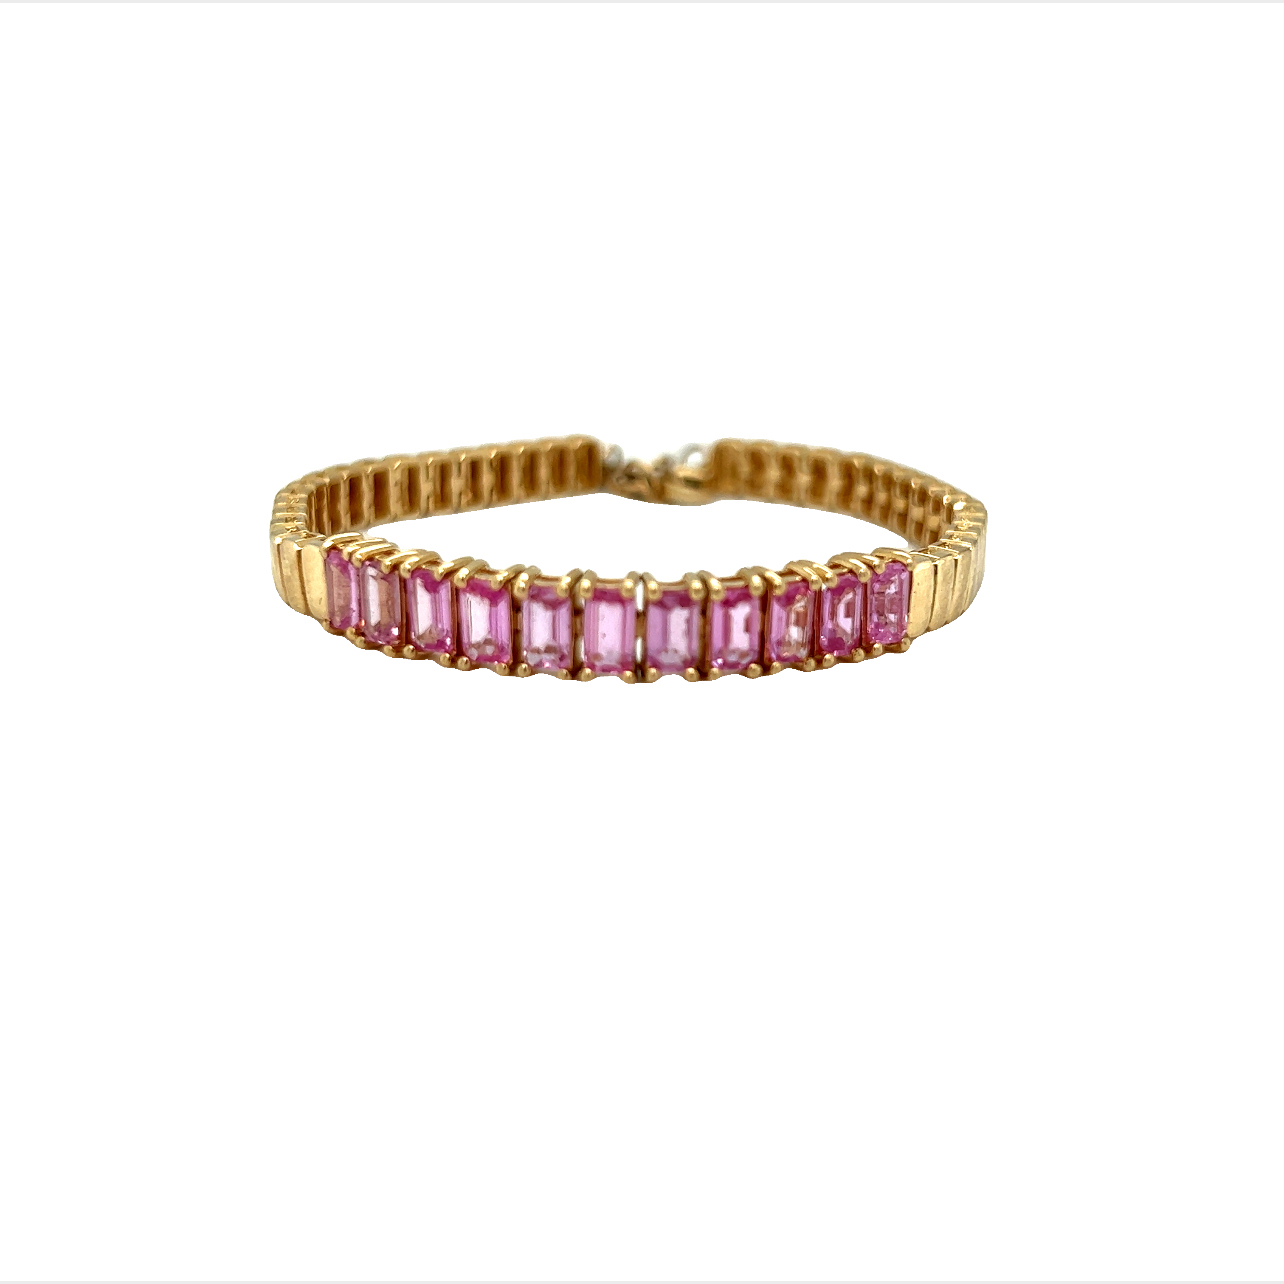 Featured image for “Pink Sapphire Baguette Bracelet”